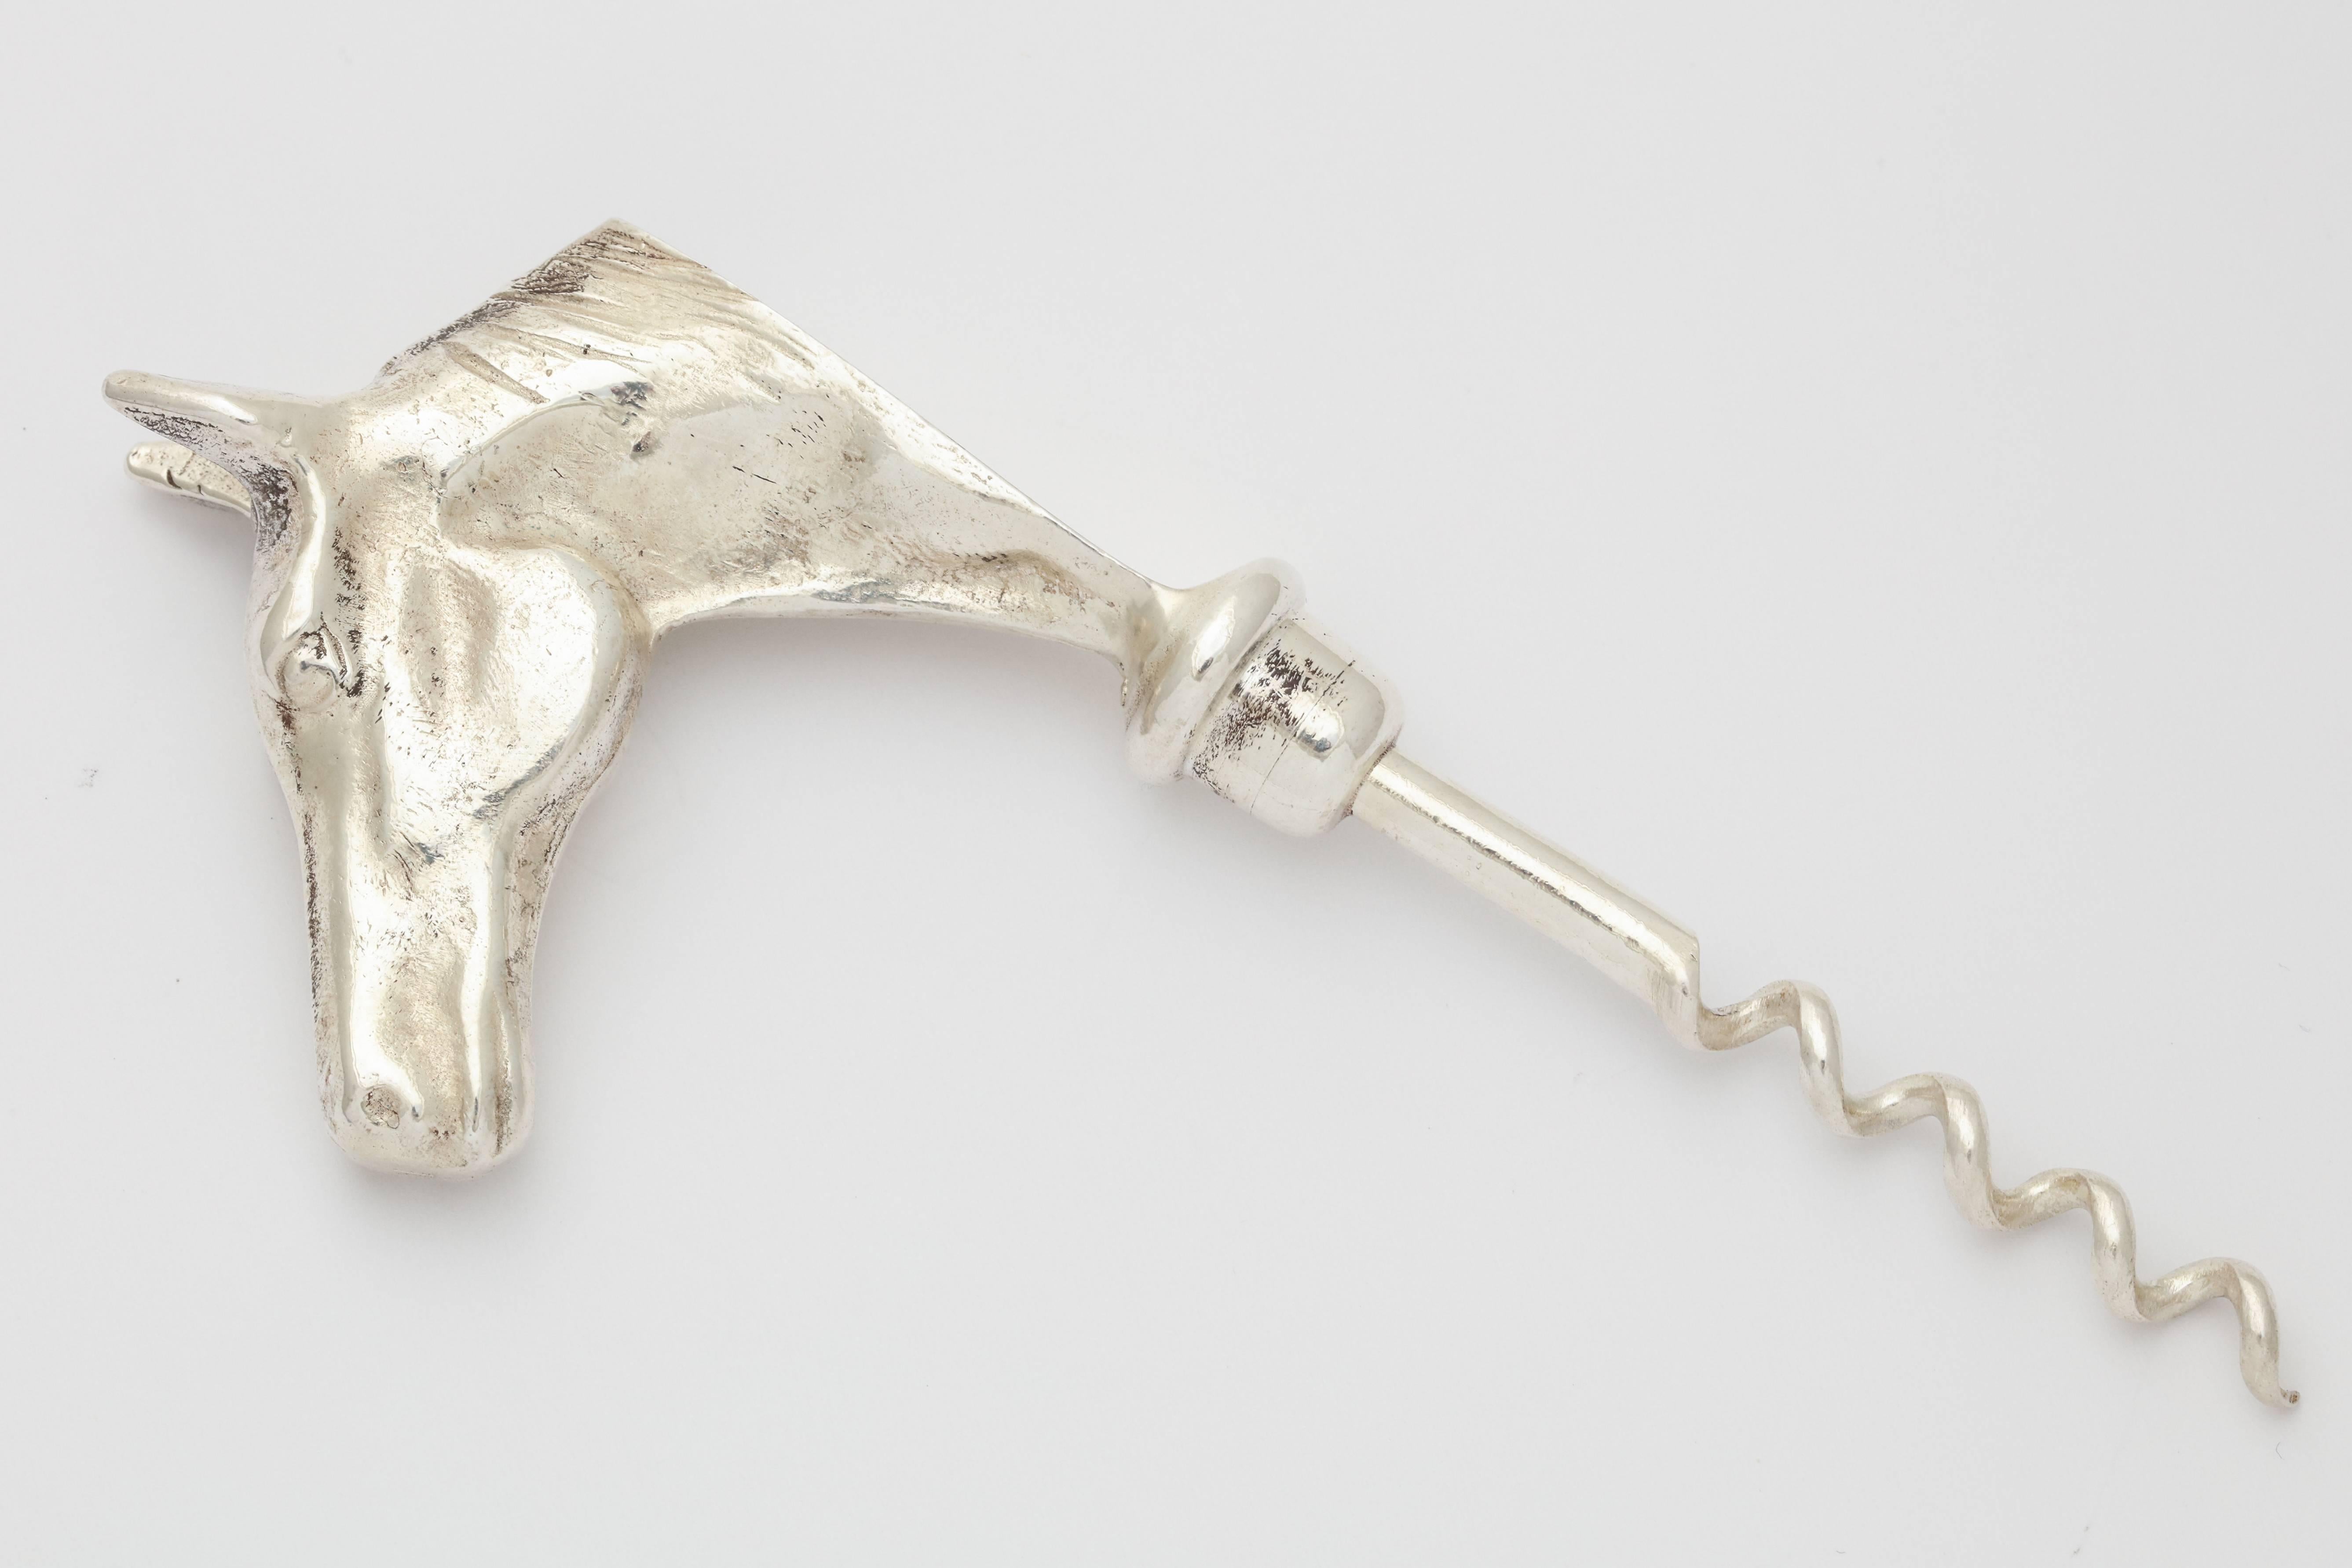 A great Hermes bottle opener corkscrew in the form of a corkscrew in silver plate with Hermes mark.